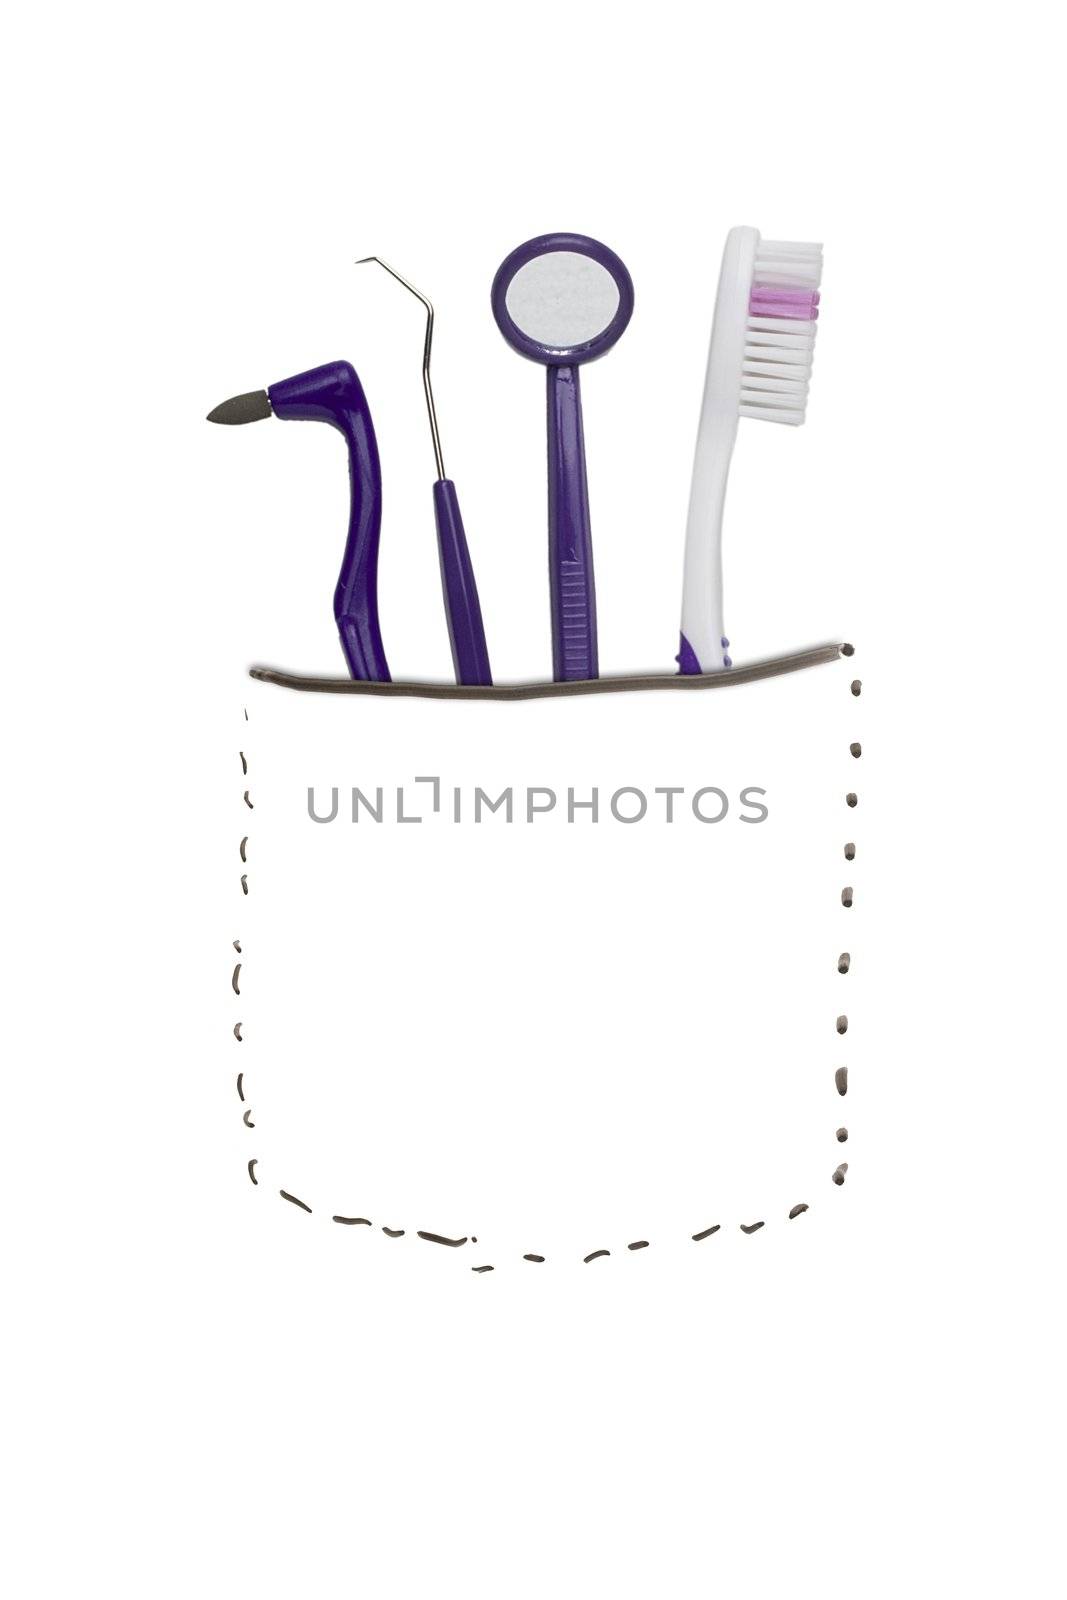 Purple dental tools in a drawn pocket. Add your text to the pocket.